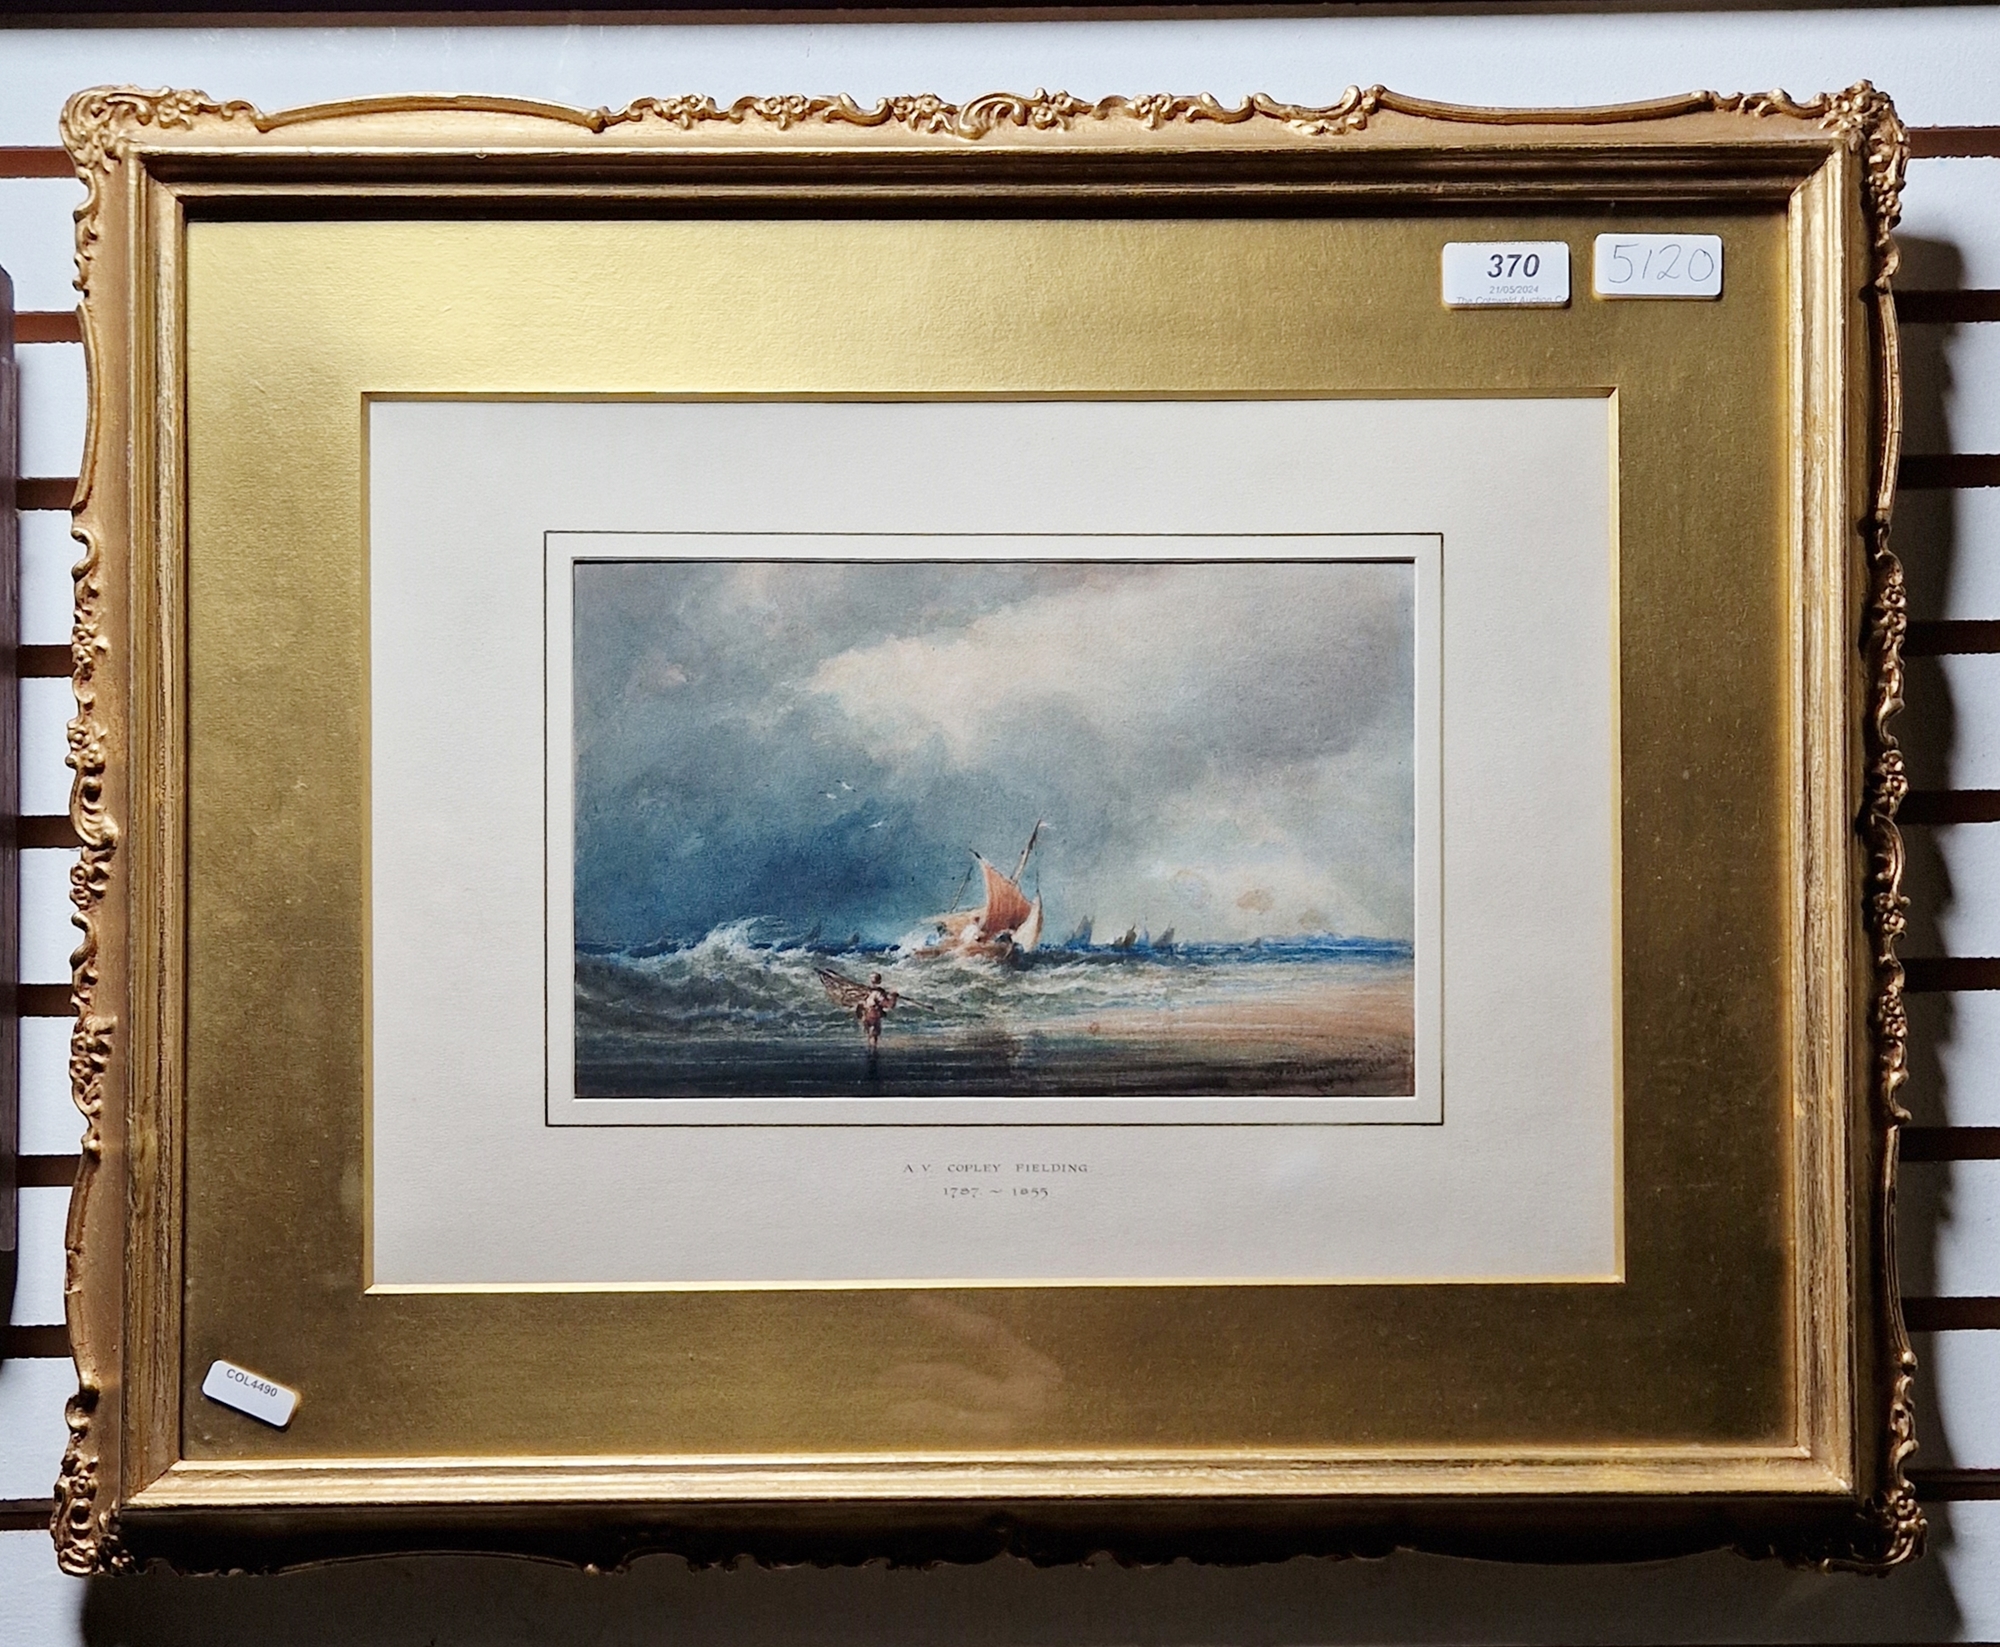 Anthony Vandyke Copley Fielding (1787-1855) Watercolour Coastal scene with boat in rough sea and - Image 2 of 9